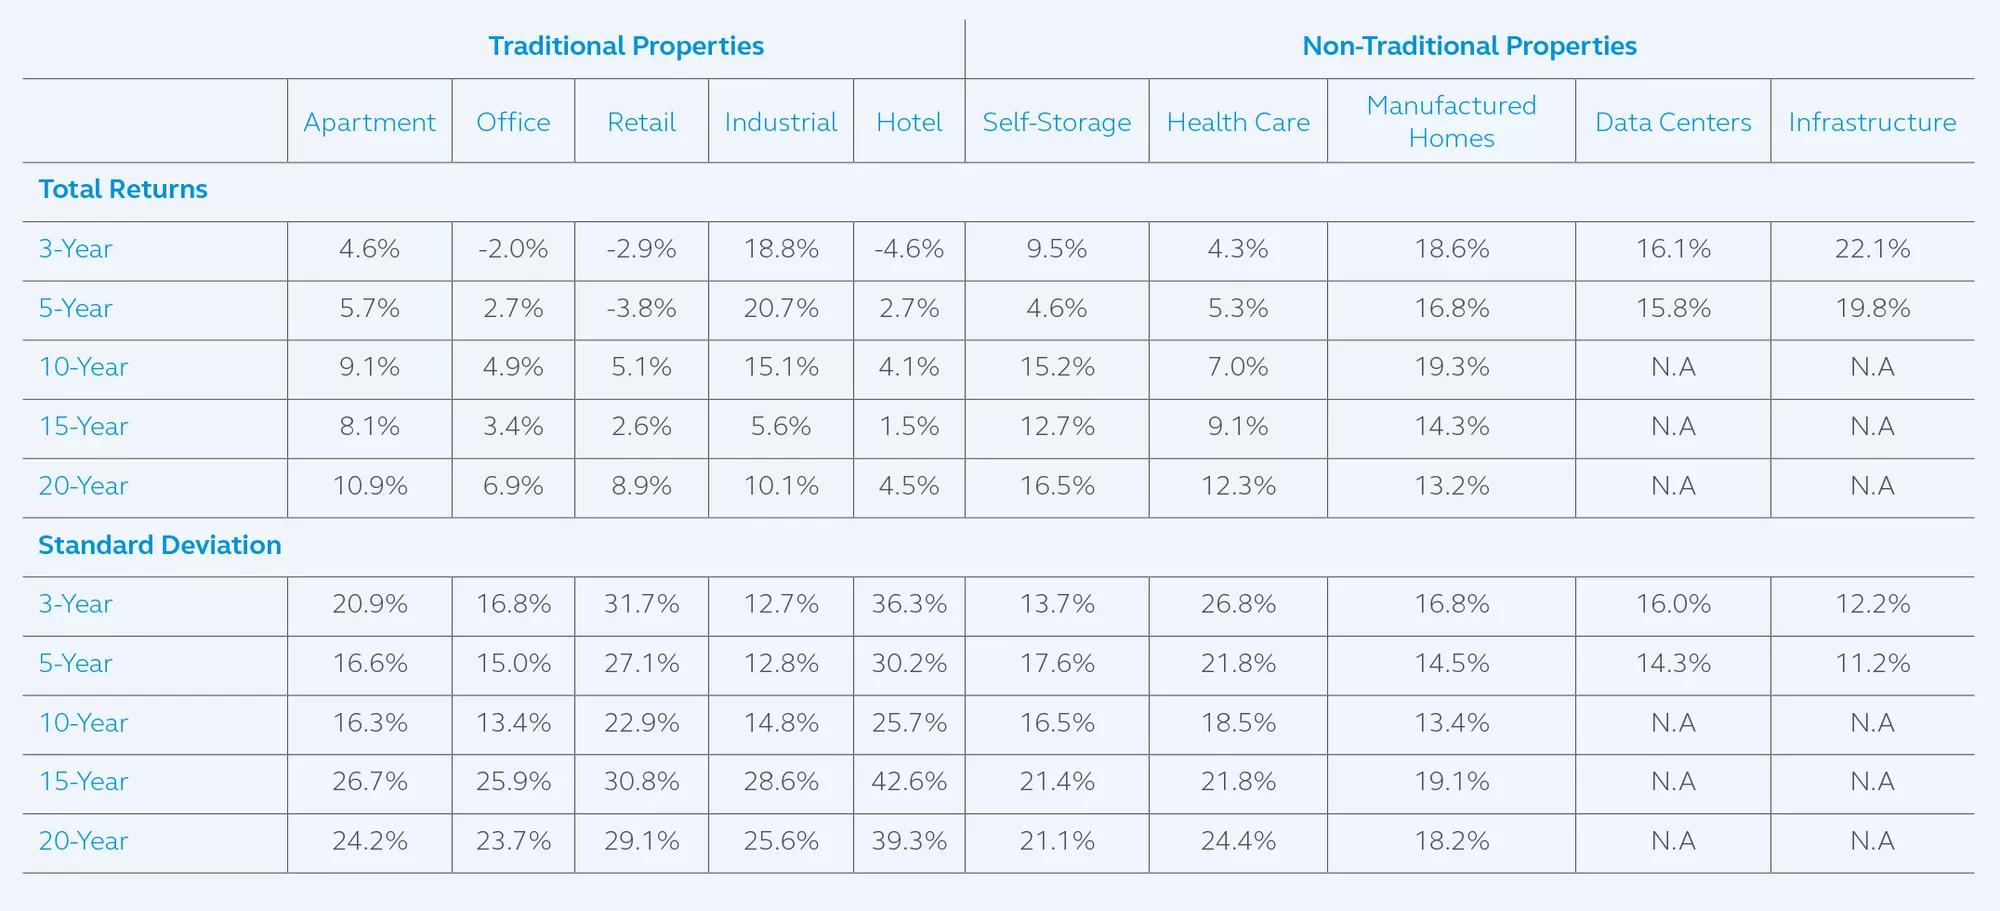 Table displaying total returns and standard deviation of traditional and non-traditional properties broken out by category in each property type